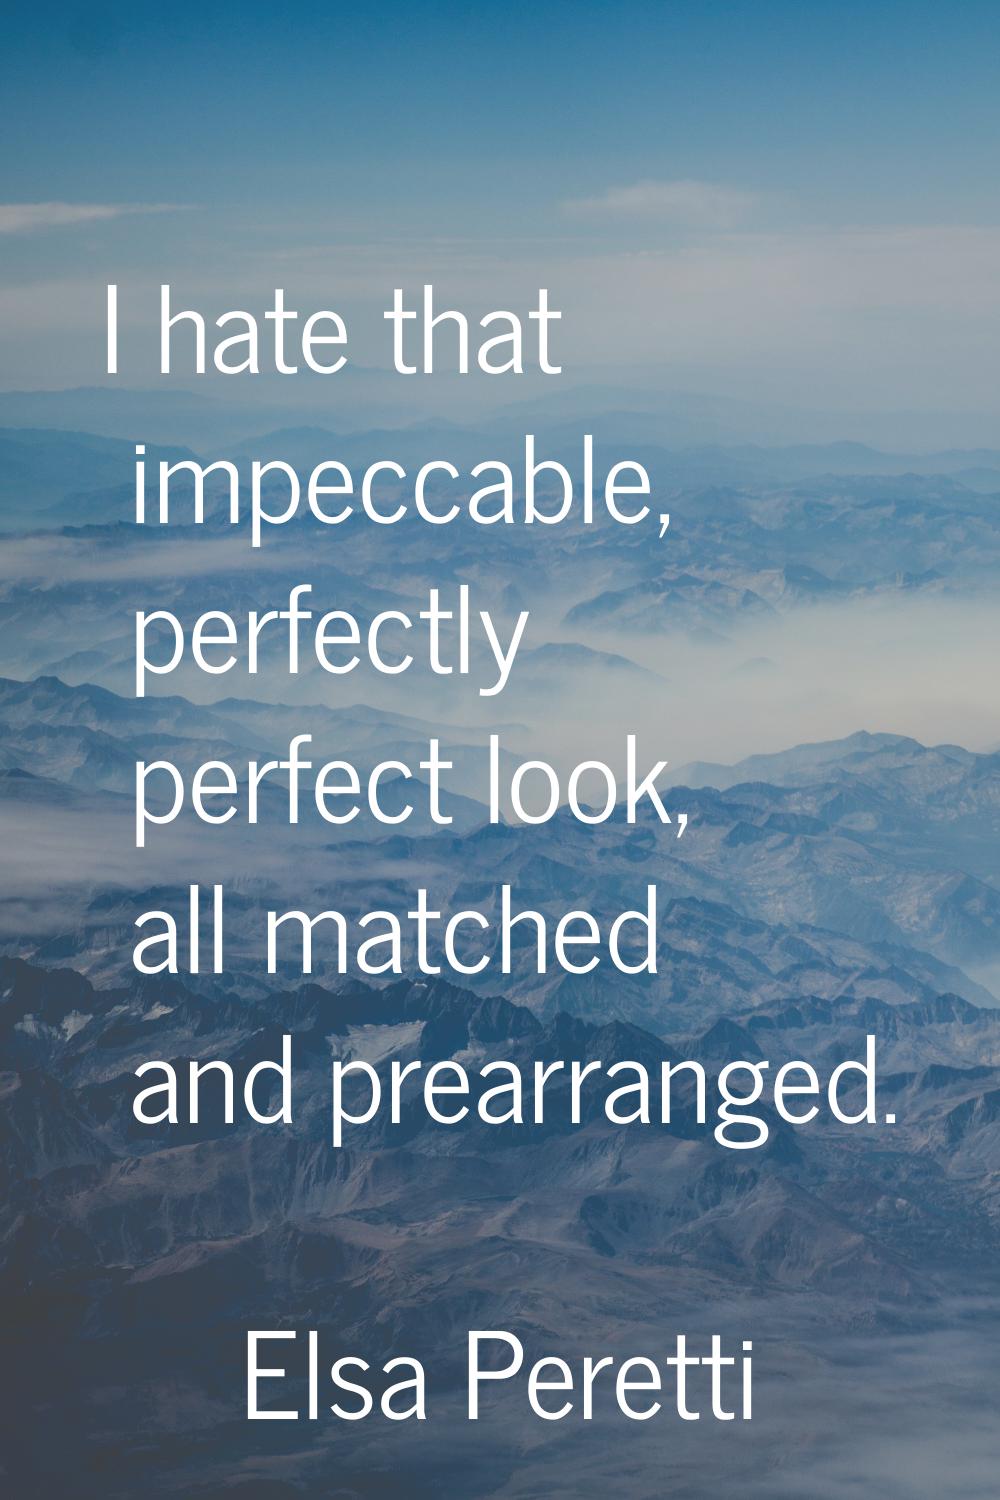 I hate that impeccable, perfectly perfect look, all matched and prearranged.